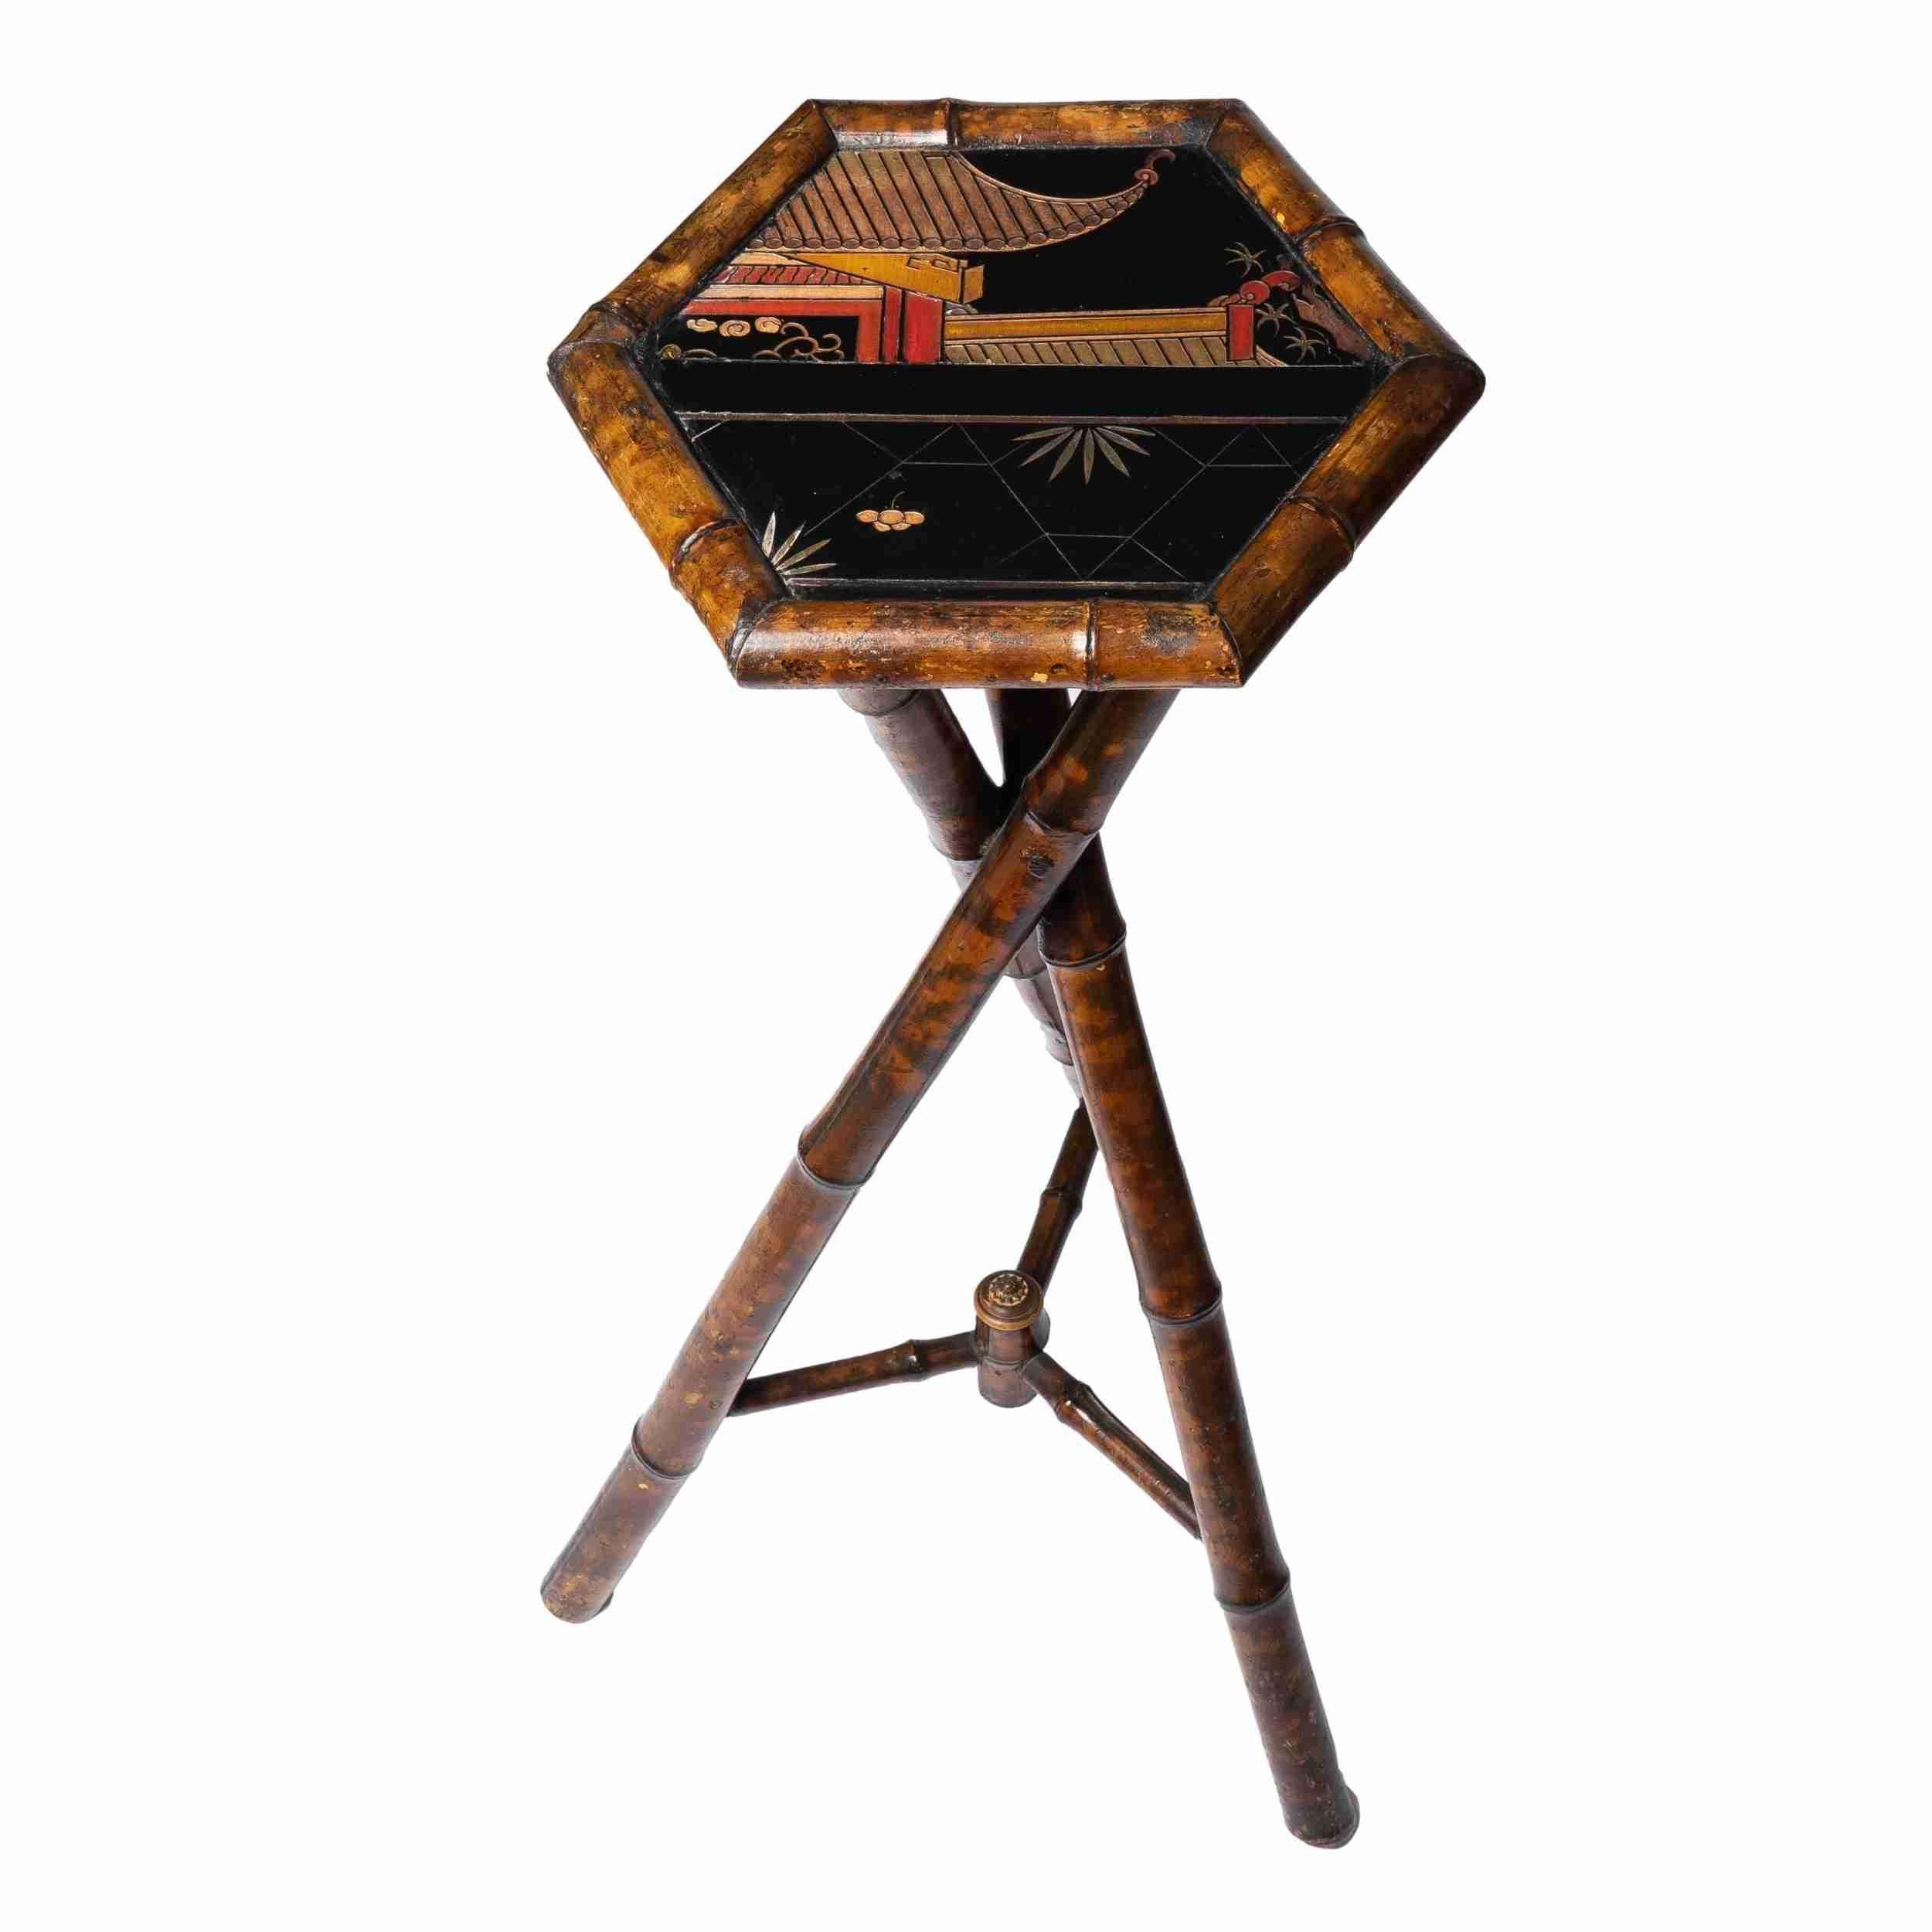 English Aesthetic Movement bamboo tripod plant stand with a painted low relief graphic carving on top. The top of the stand features a geometric pattern with floral shapes on the bottom half and a truncated view of a red and yellow painted Asian